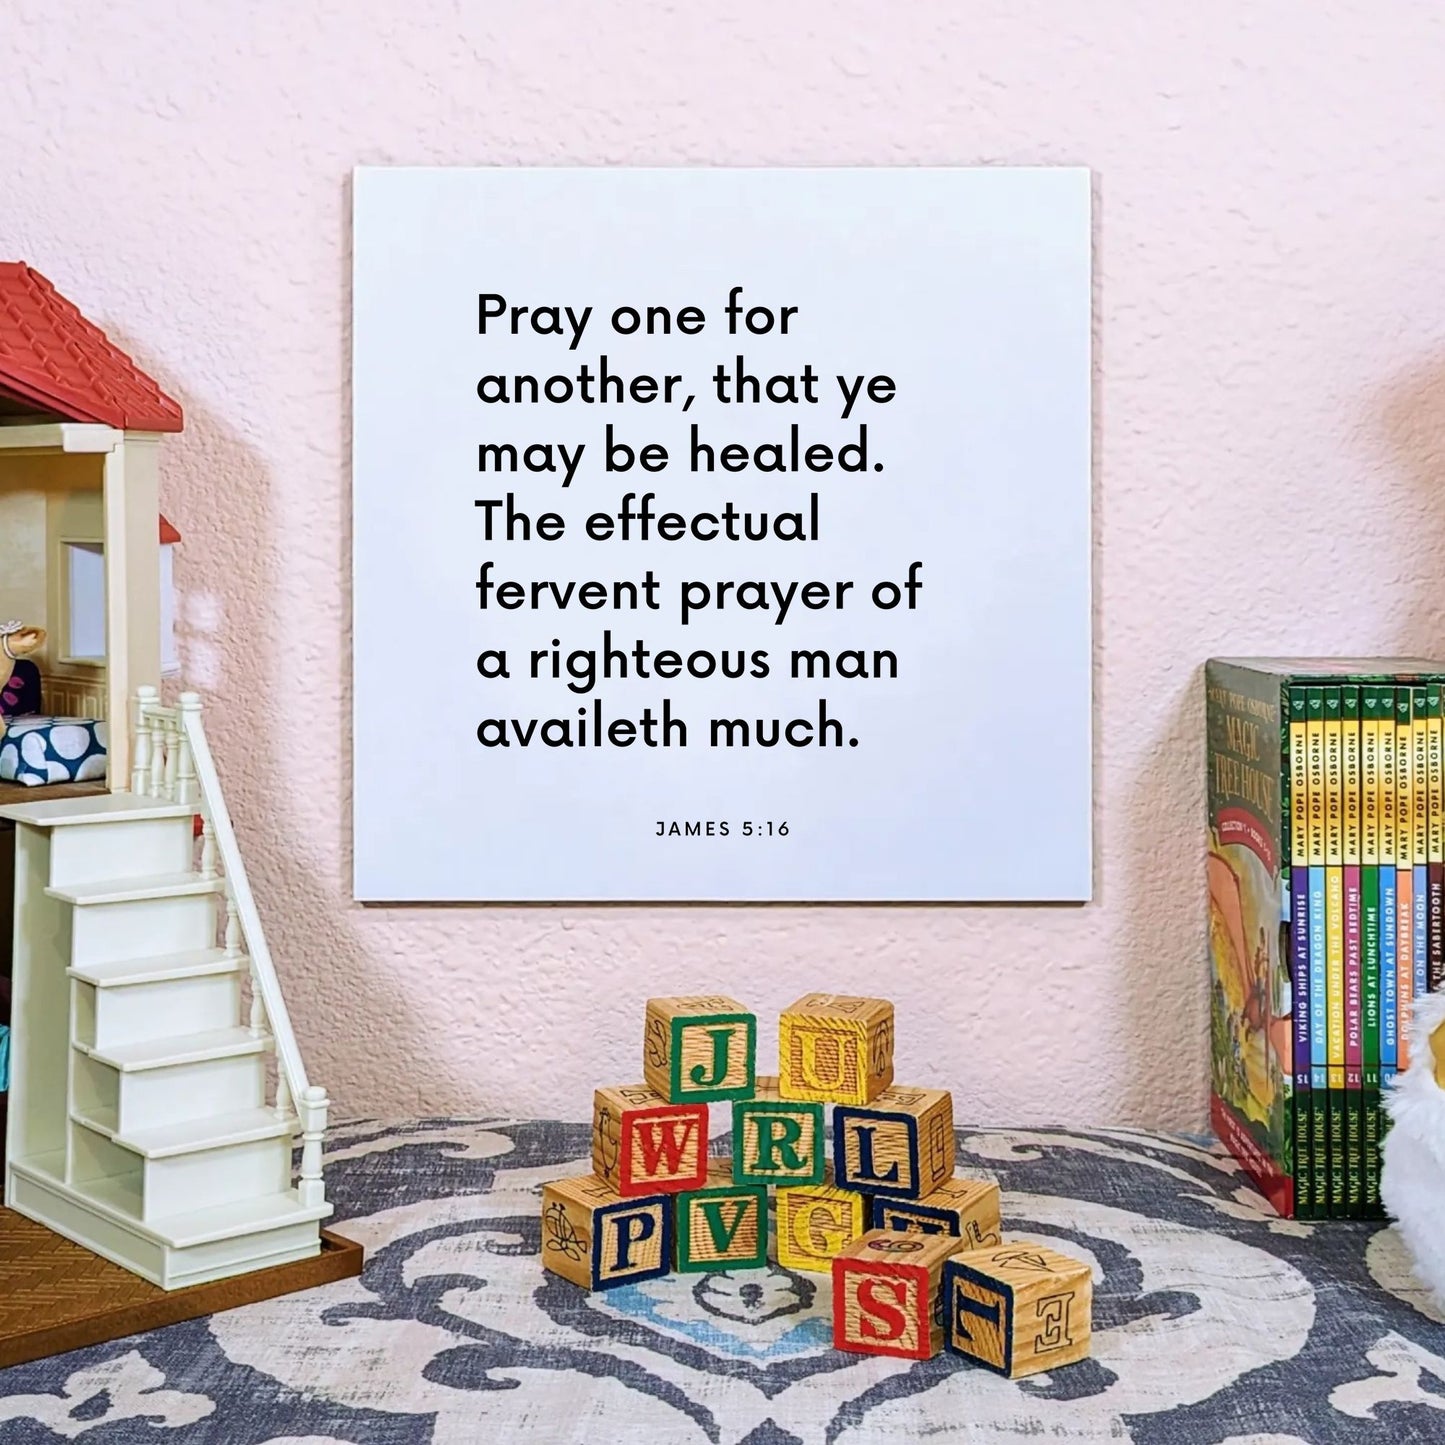 Playroom mouting of the scripture tile for James 5:16 - "Pray one for another, that ye may be healed"